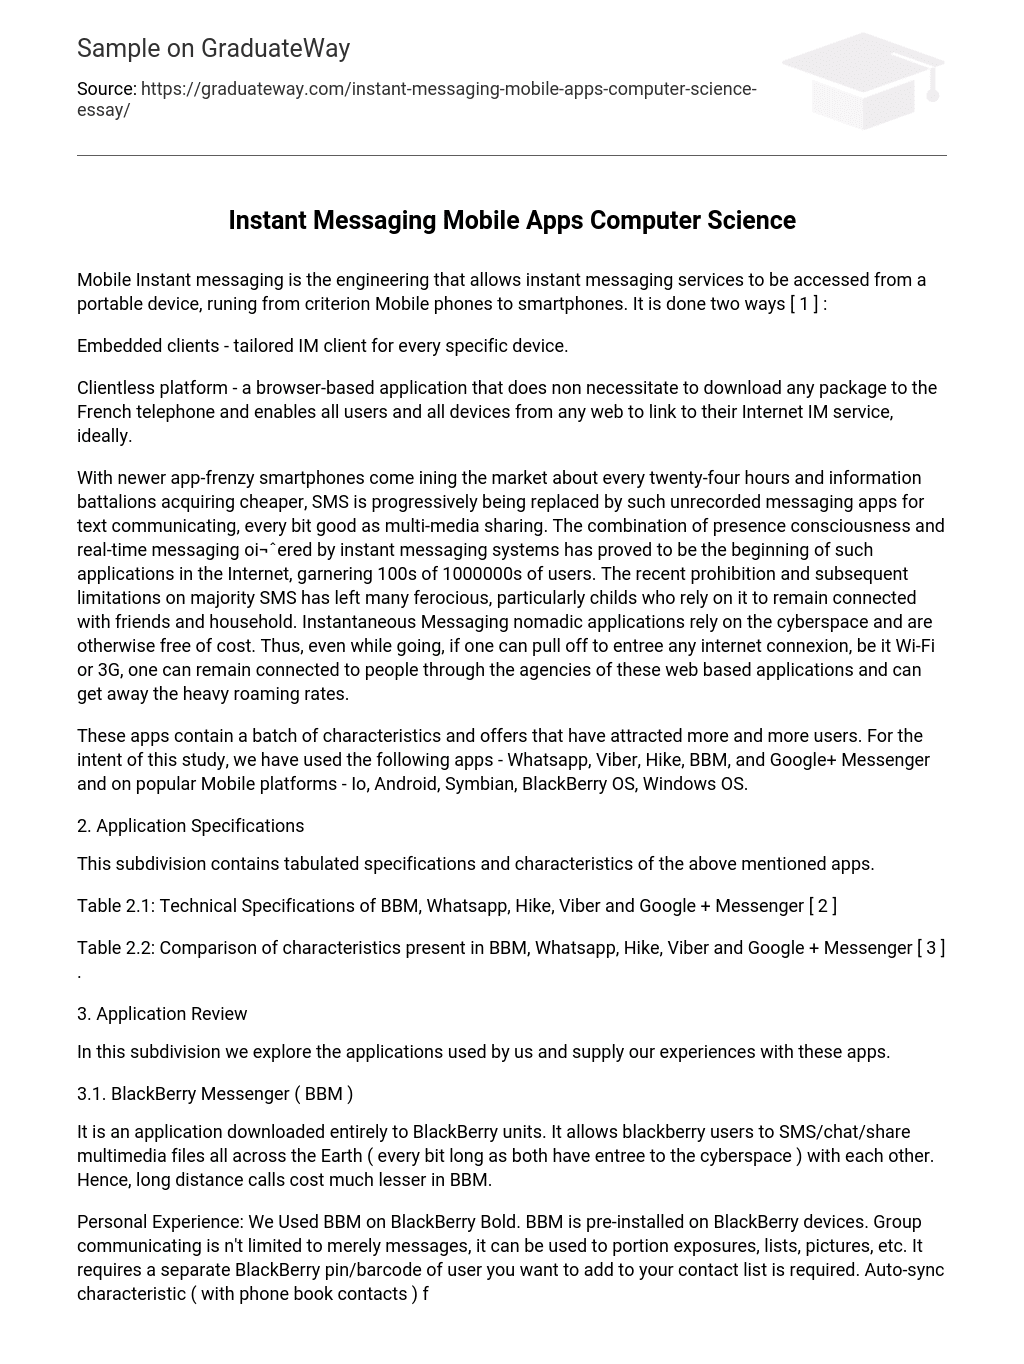 Instant Messaging Mobile Apps Computer Science